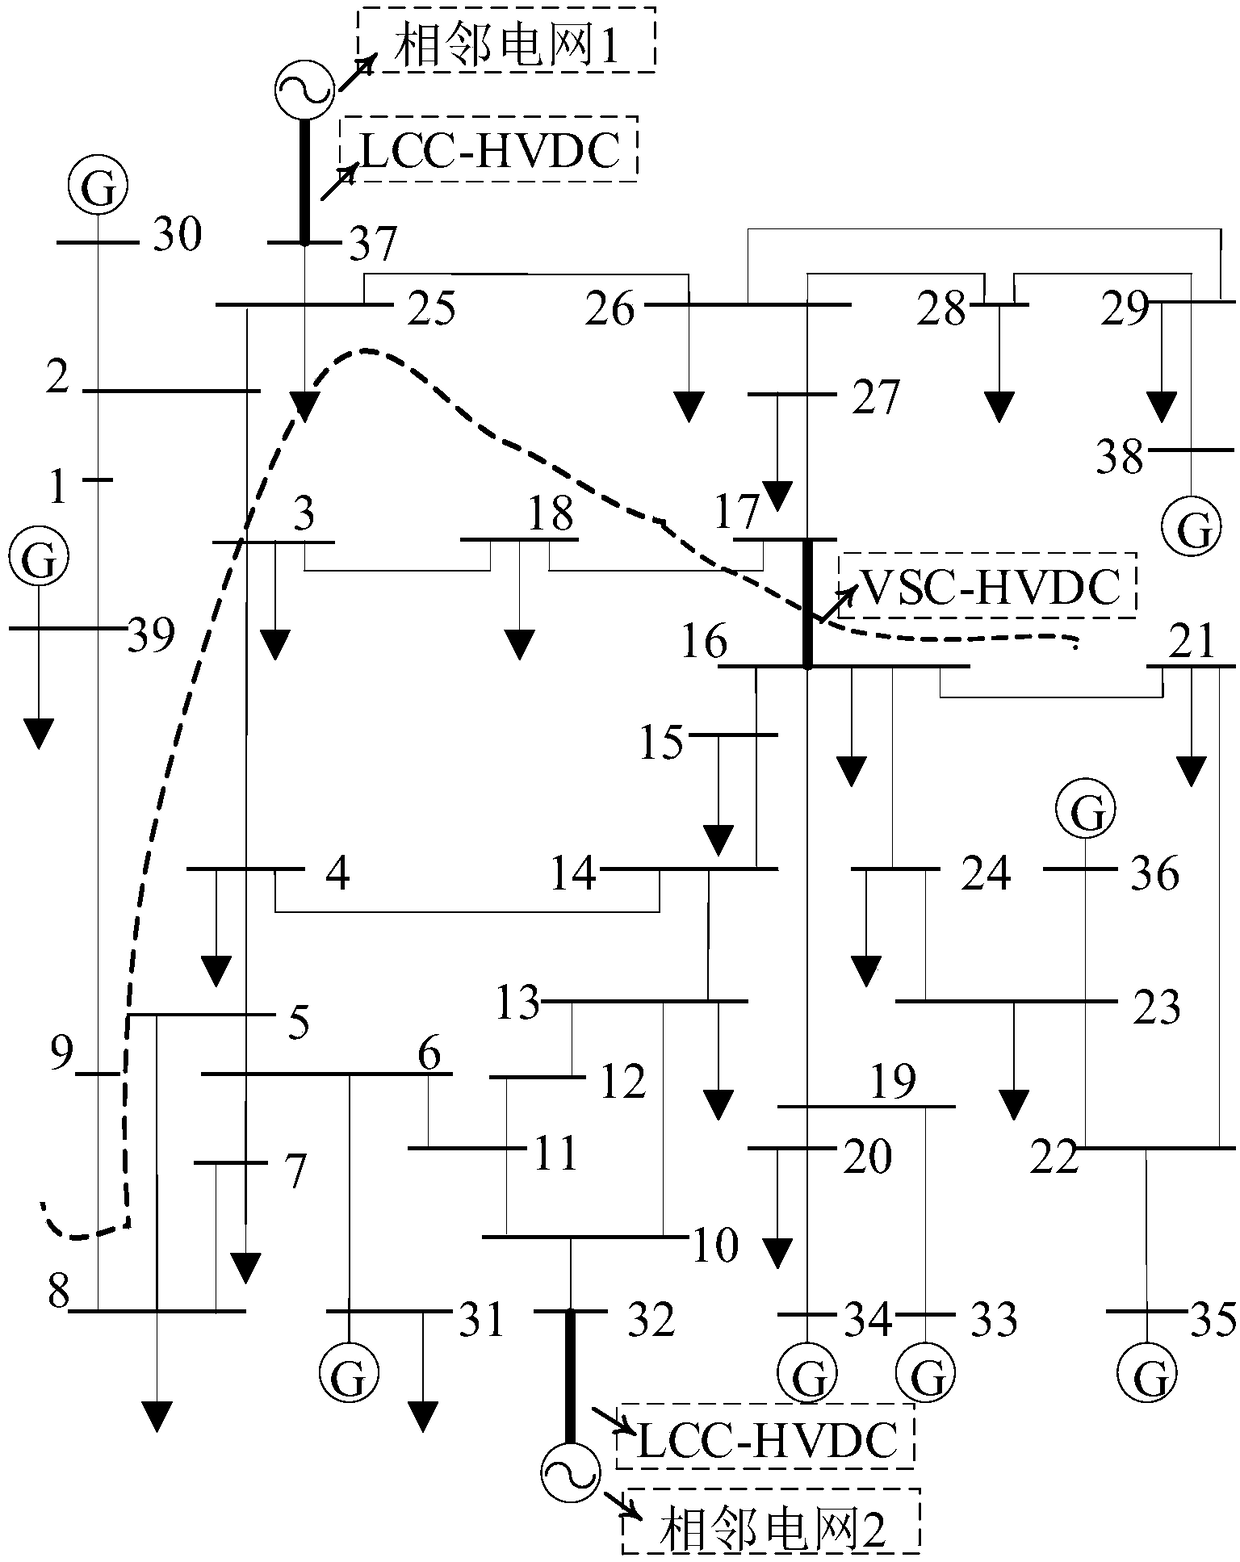 A method for optimize parallel restoration of AC/DC hybrid power system